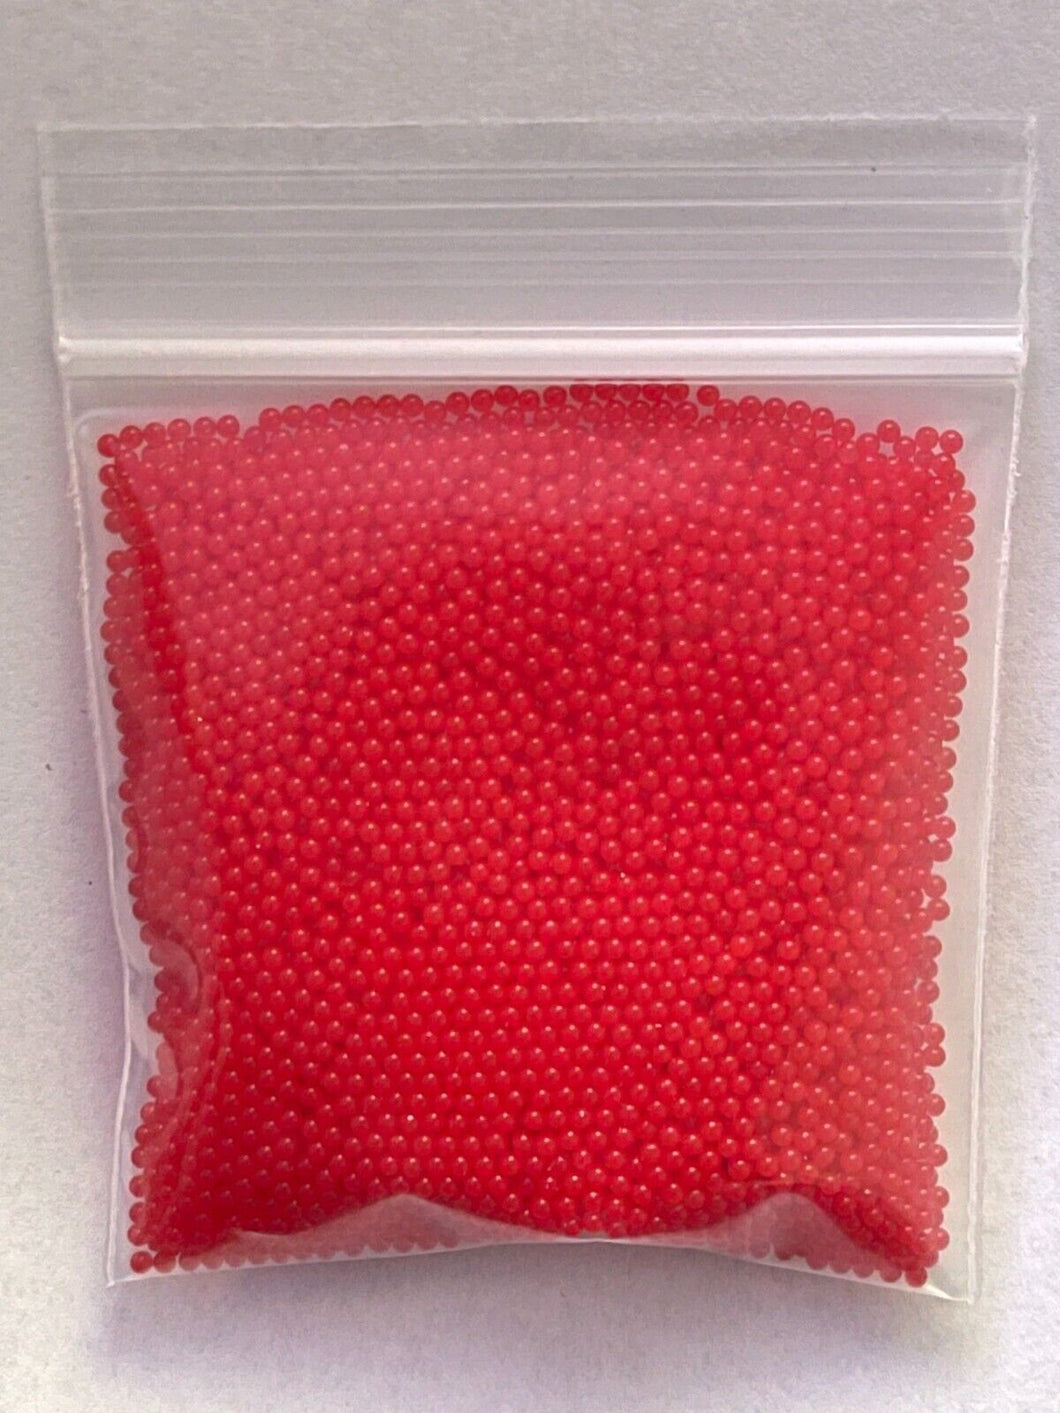 10,000 Harden Gel Ball Water Bullet Crystal Ammo 7-8mm for Gel Blaster Toy RED